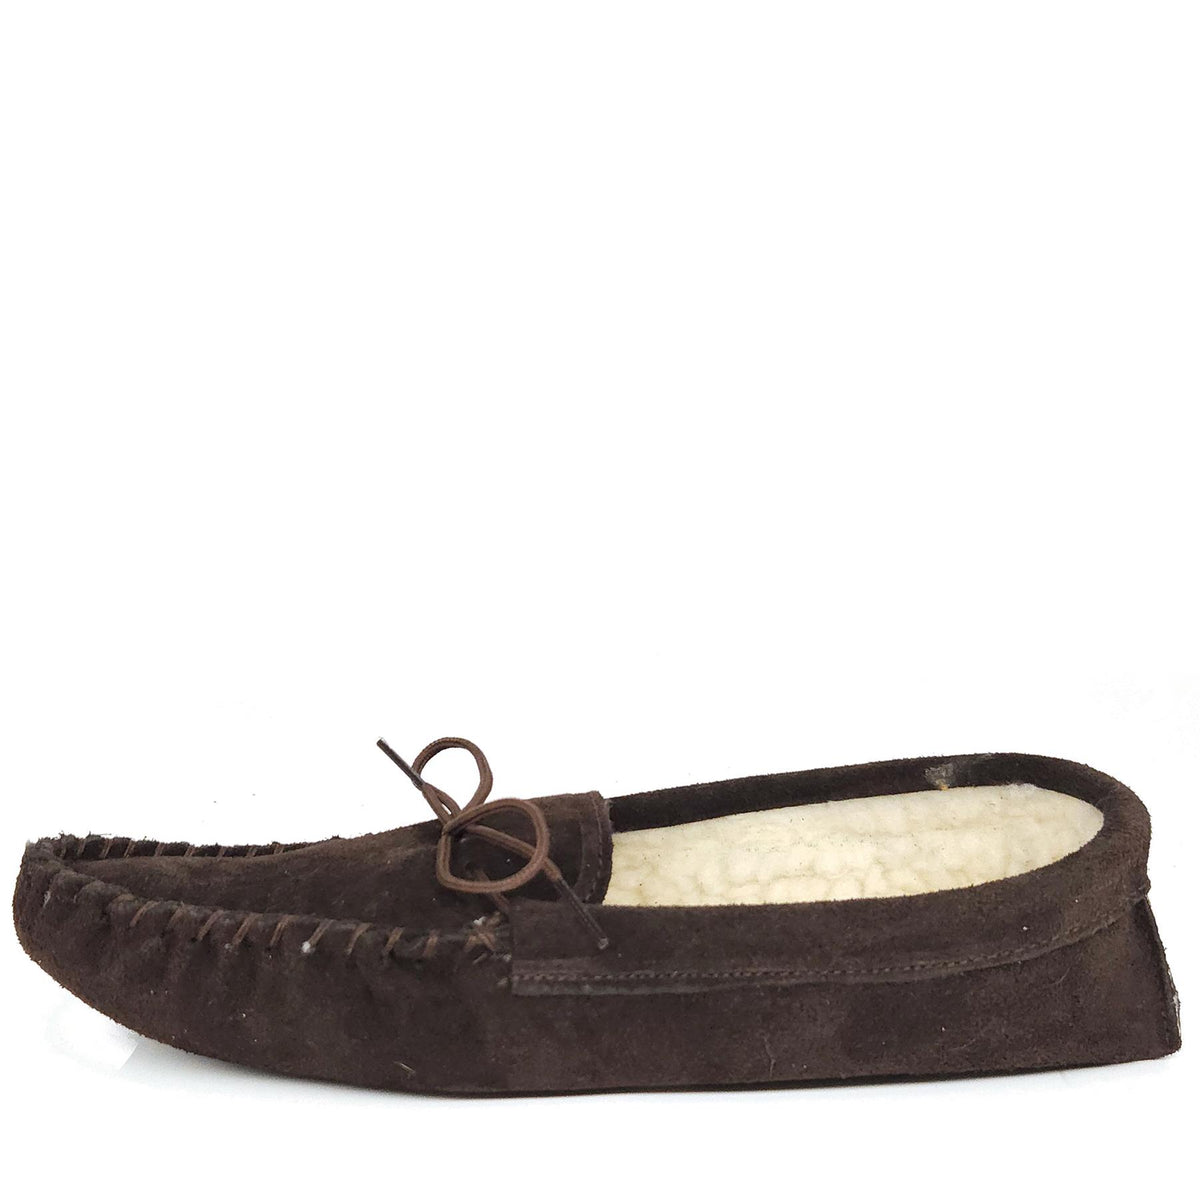 Coopers Suede Fleece Lined Soft Sole Mens Moccasin Slippers Made In England